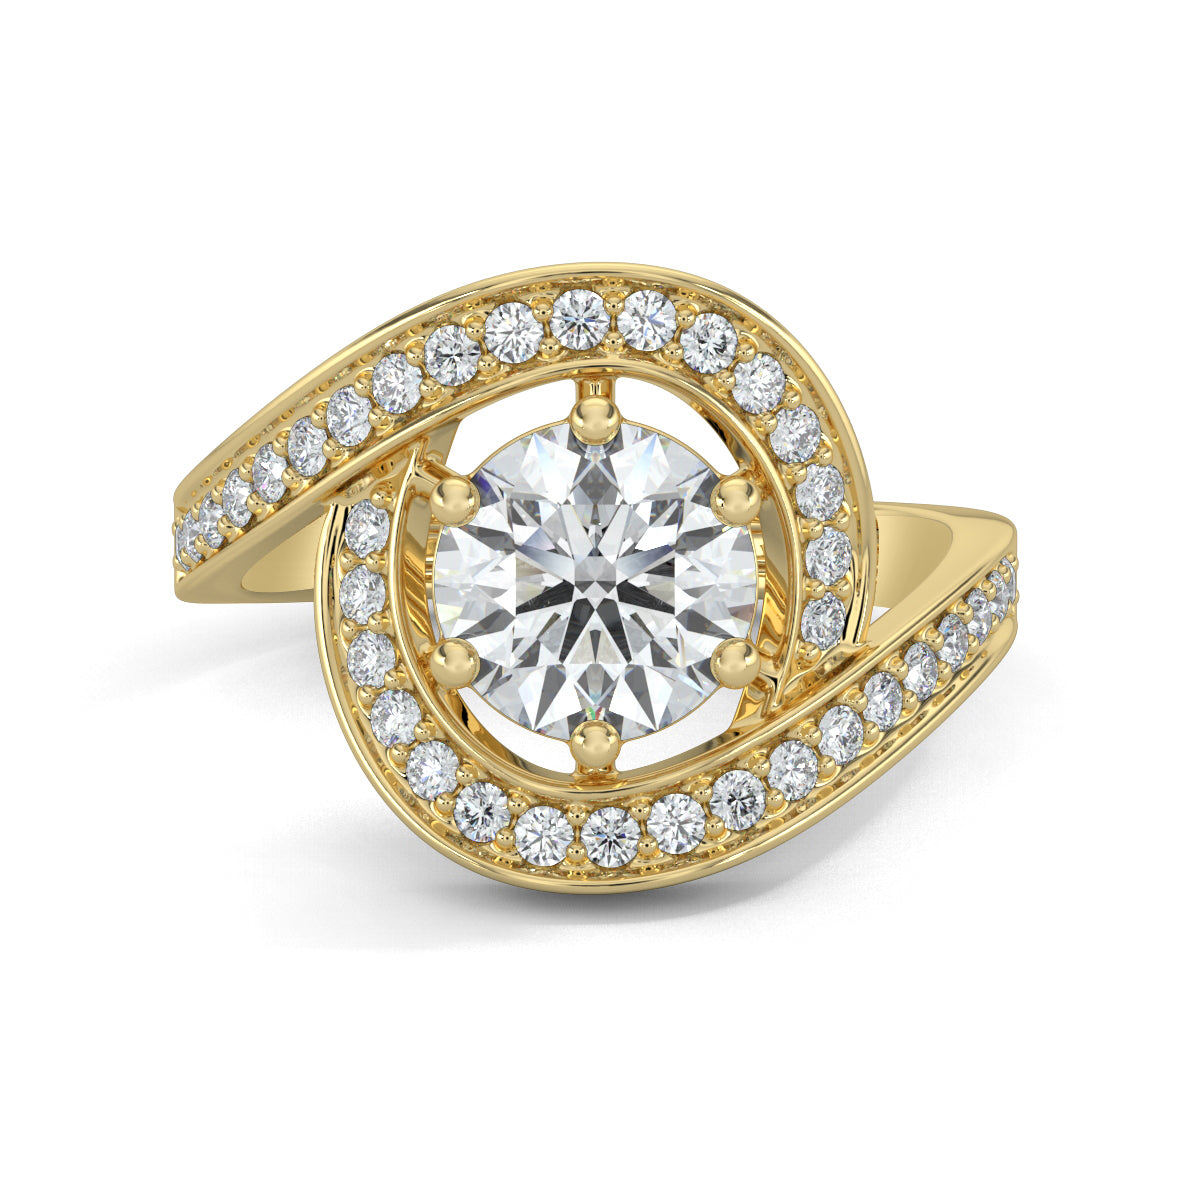 Yellow Gold, Diamond Ring, Luminous Loop, Solitaire Ring, Natural Diamonds, Lab-Grown Diamonds, Loop Band, Pave Setting, Ethical Jewelry, Sustainable Diamonds, Engagement Ring, Diamond Jewelry